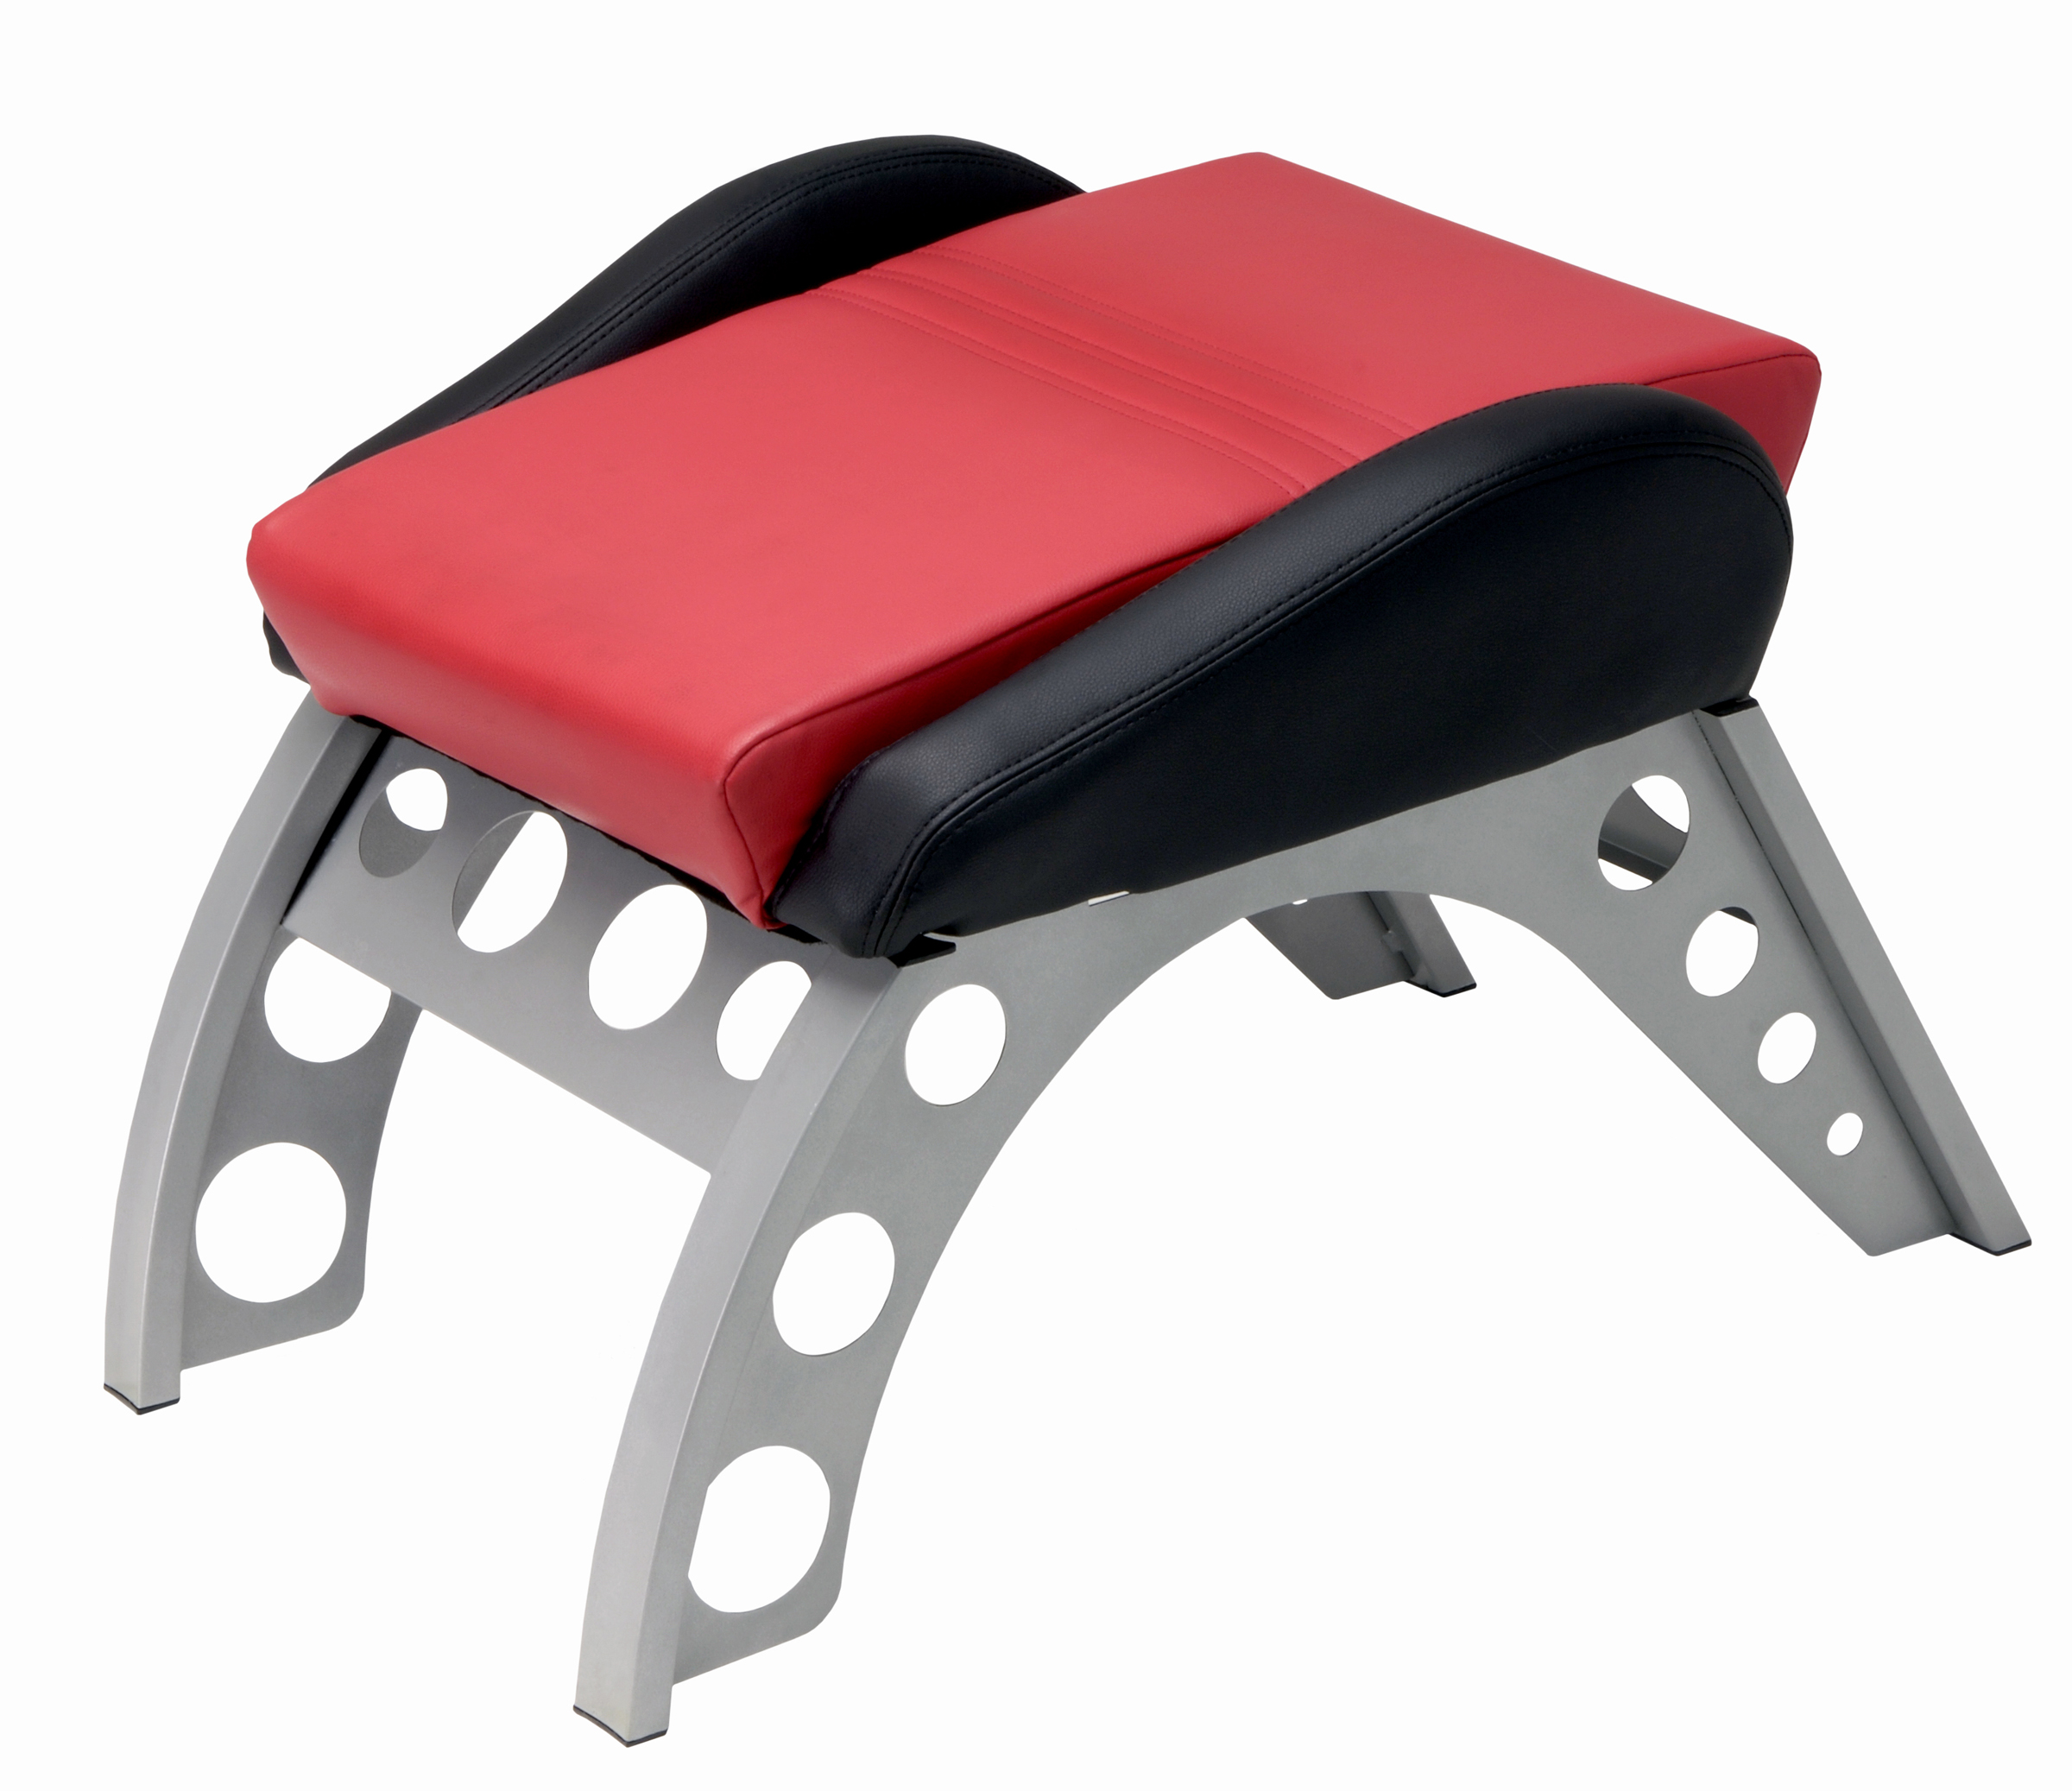 Intro-Tech Automotive, Pitstop Furniture, FR3000R Foot Rest Red, Foot Rest